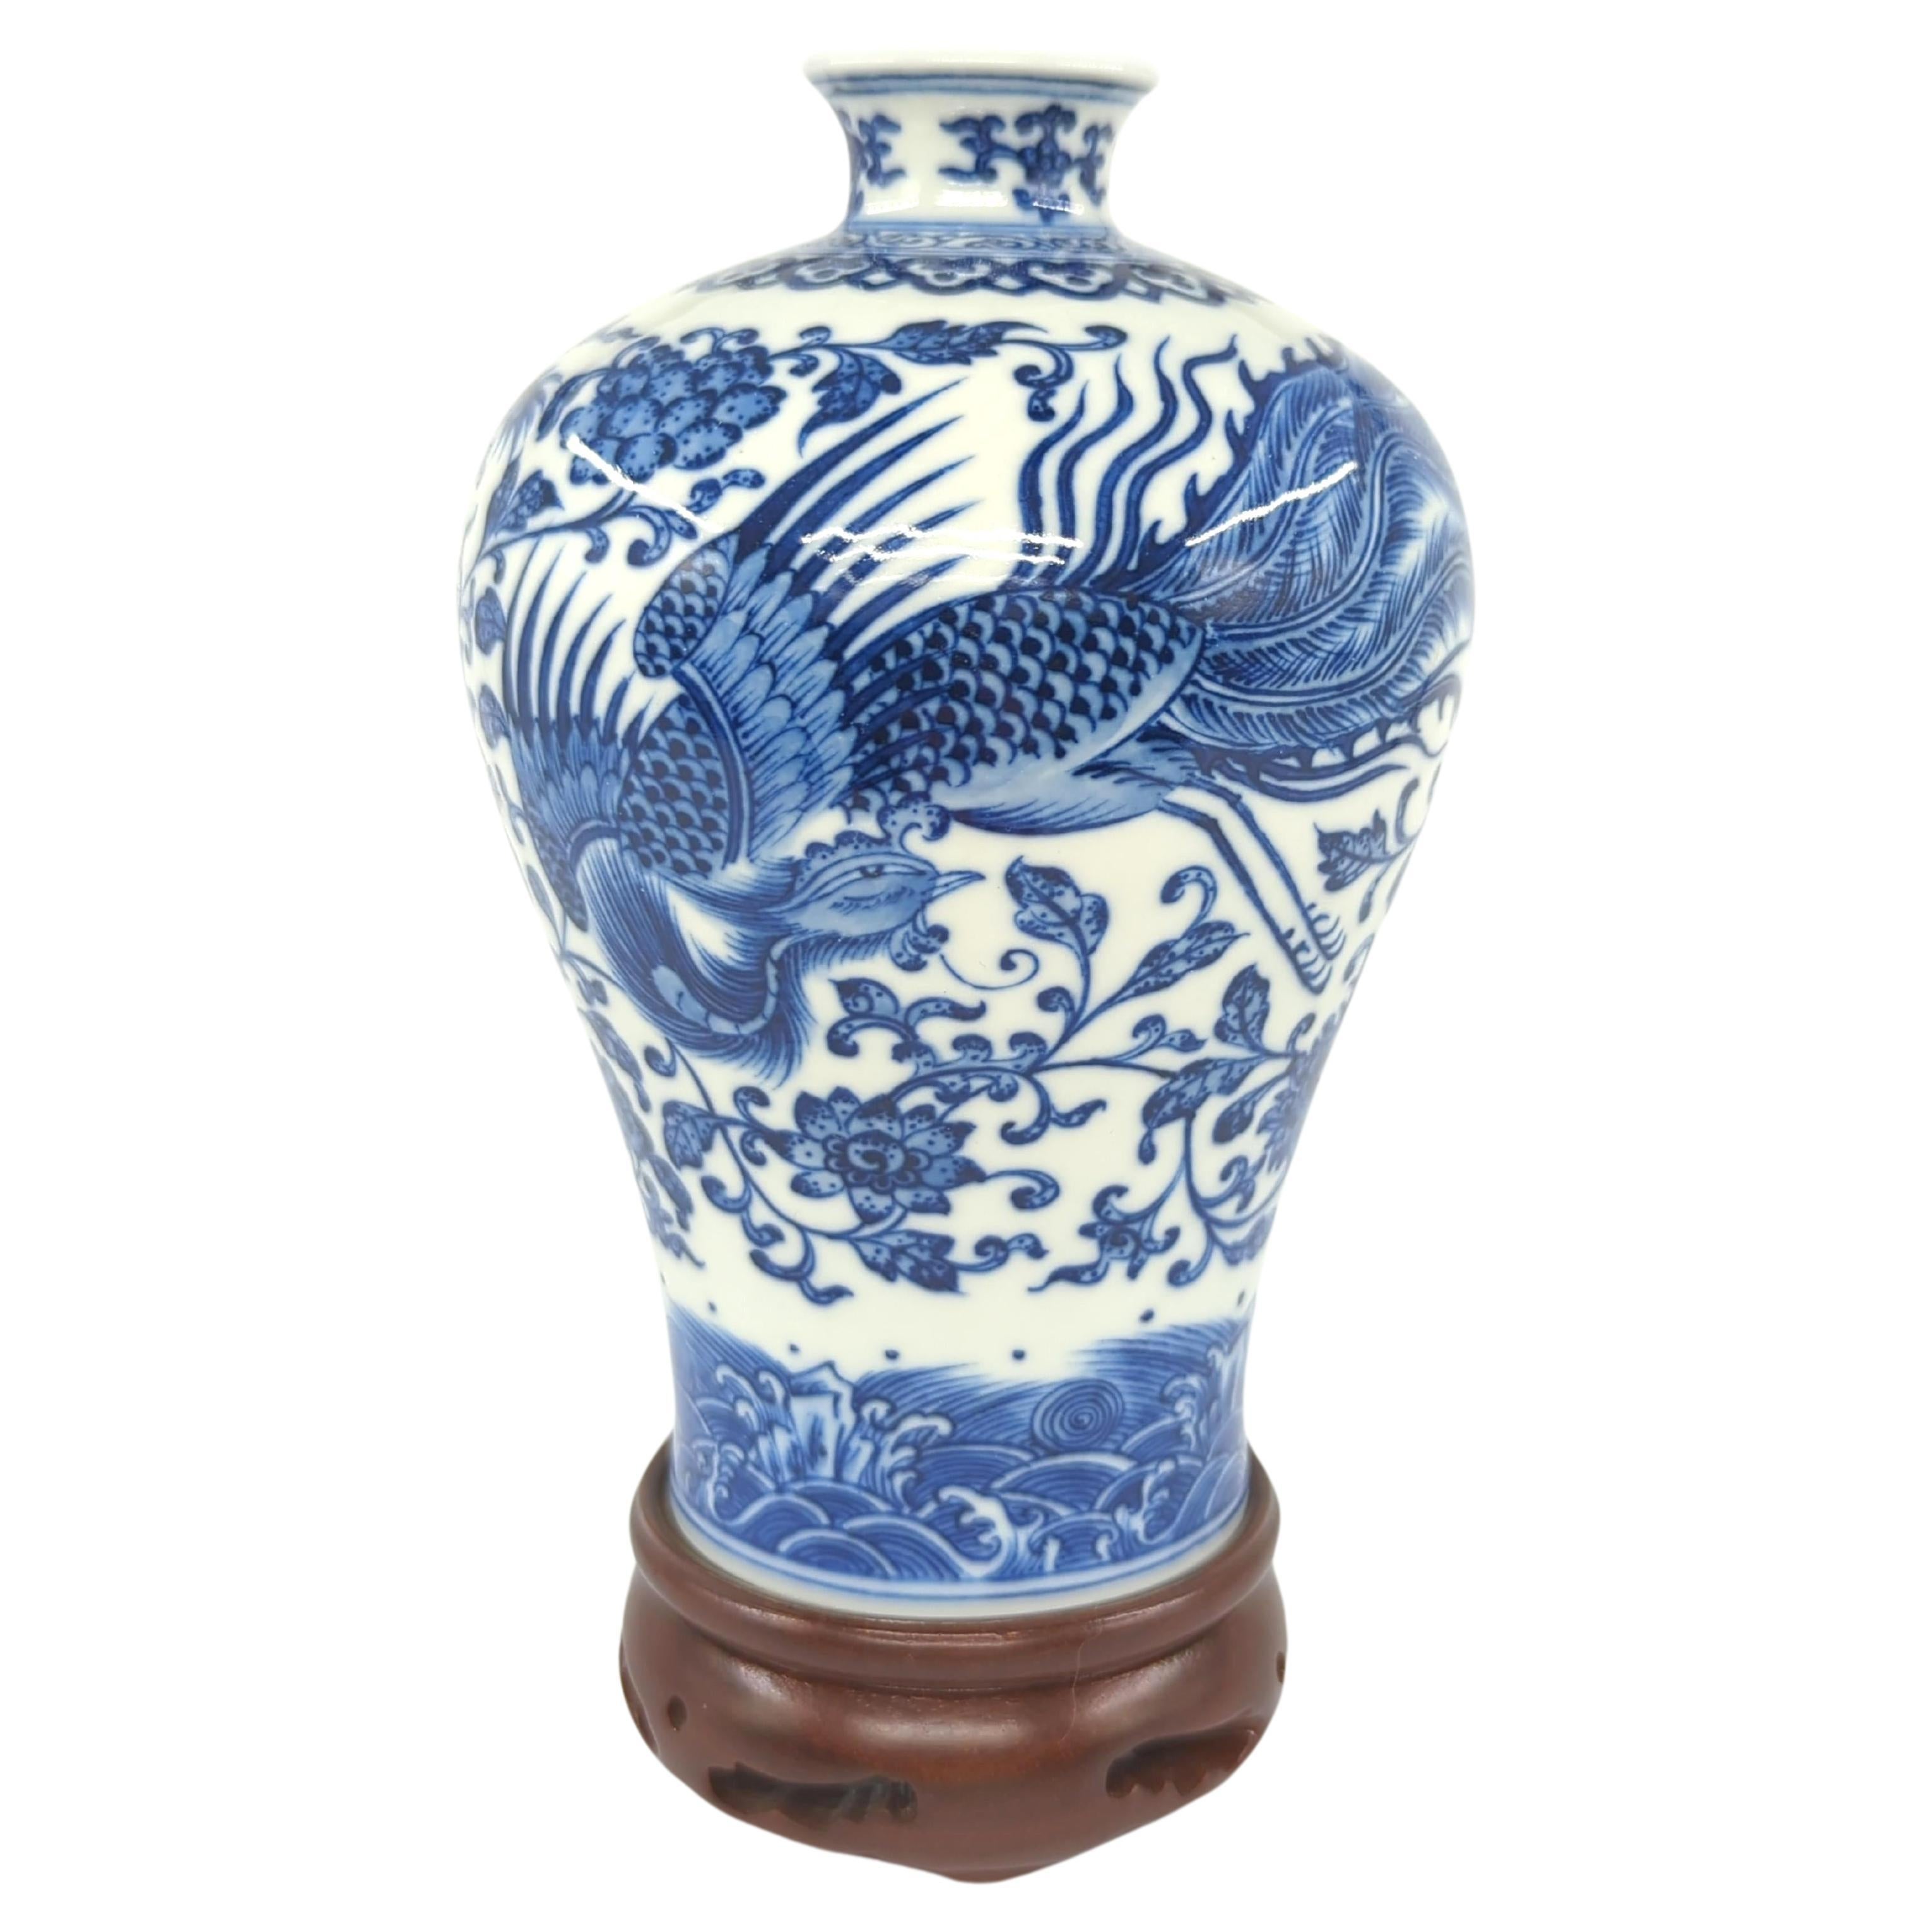 This Chinese blue and white Meiping vase is not only a masterful example of ceramic artistry but also a tribute to traditional craftsmanship. Meticulously hand-painted and exceptionally well-potted, the vase was fired in a traditional pine